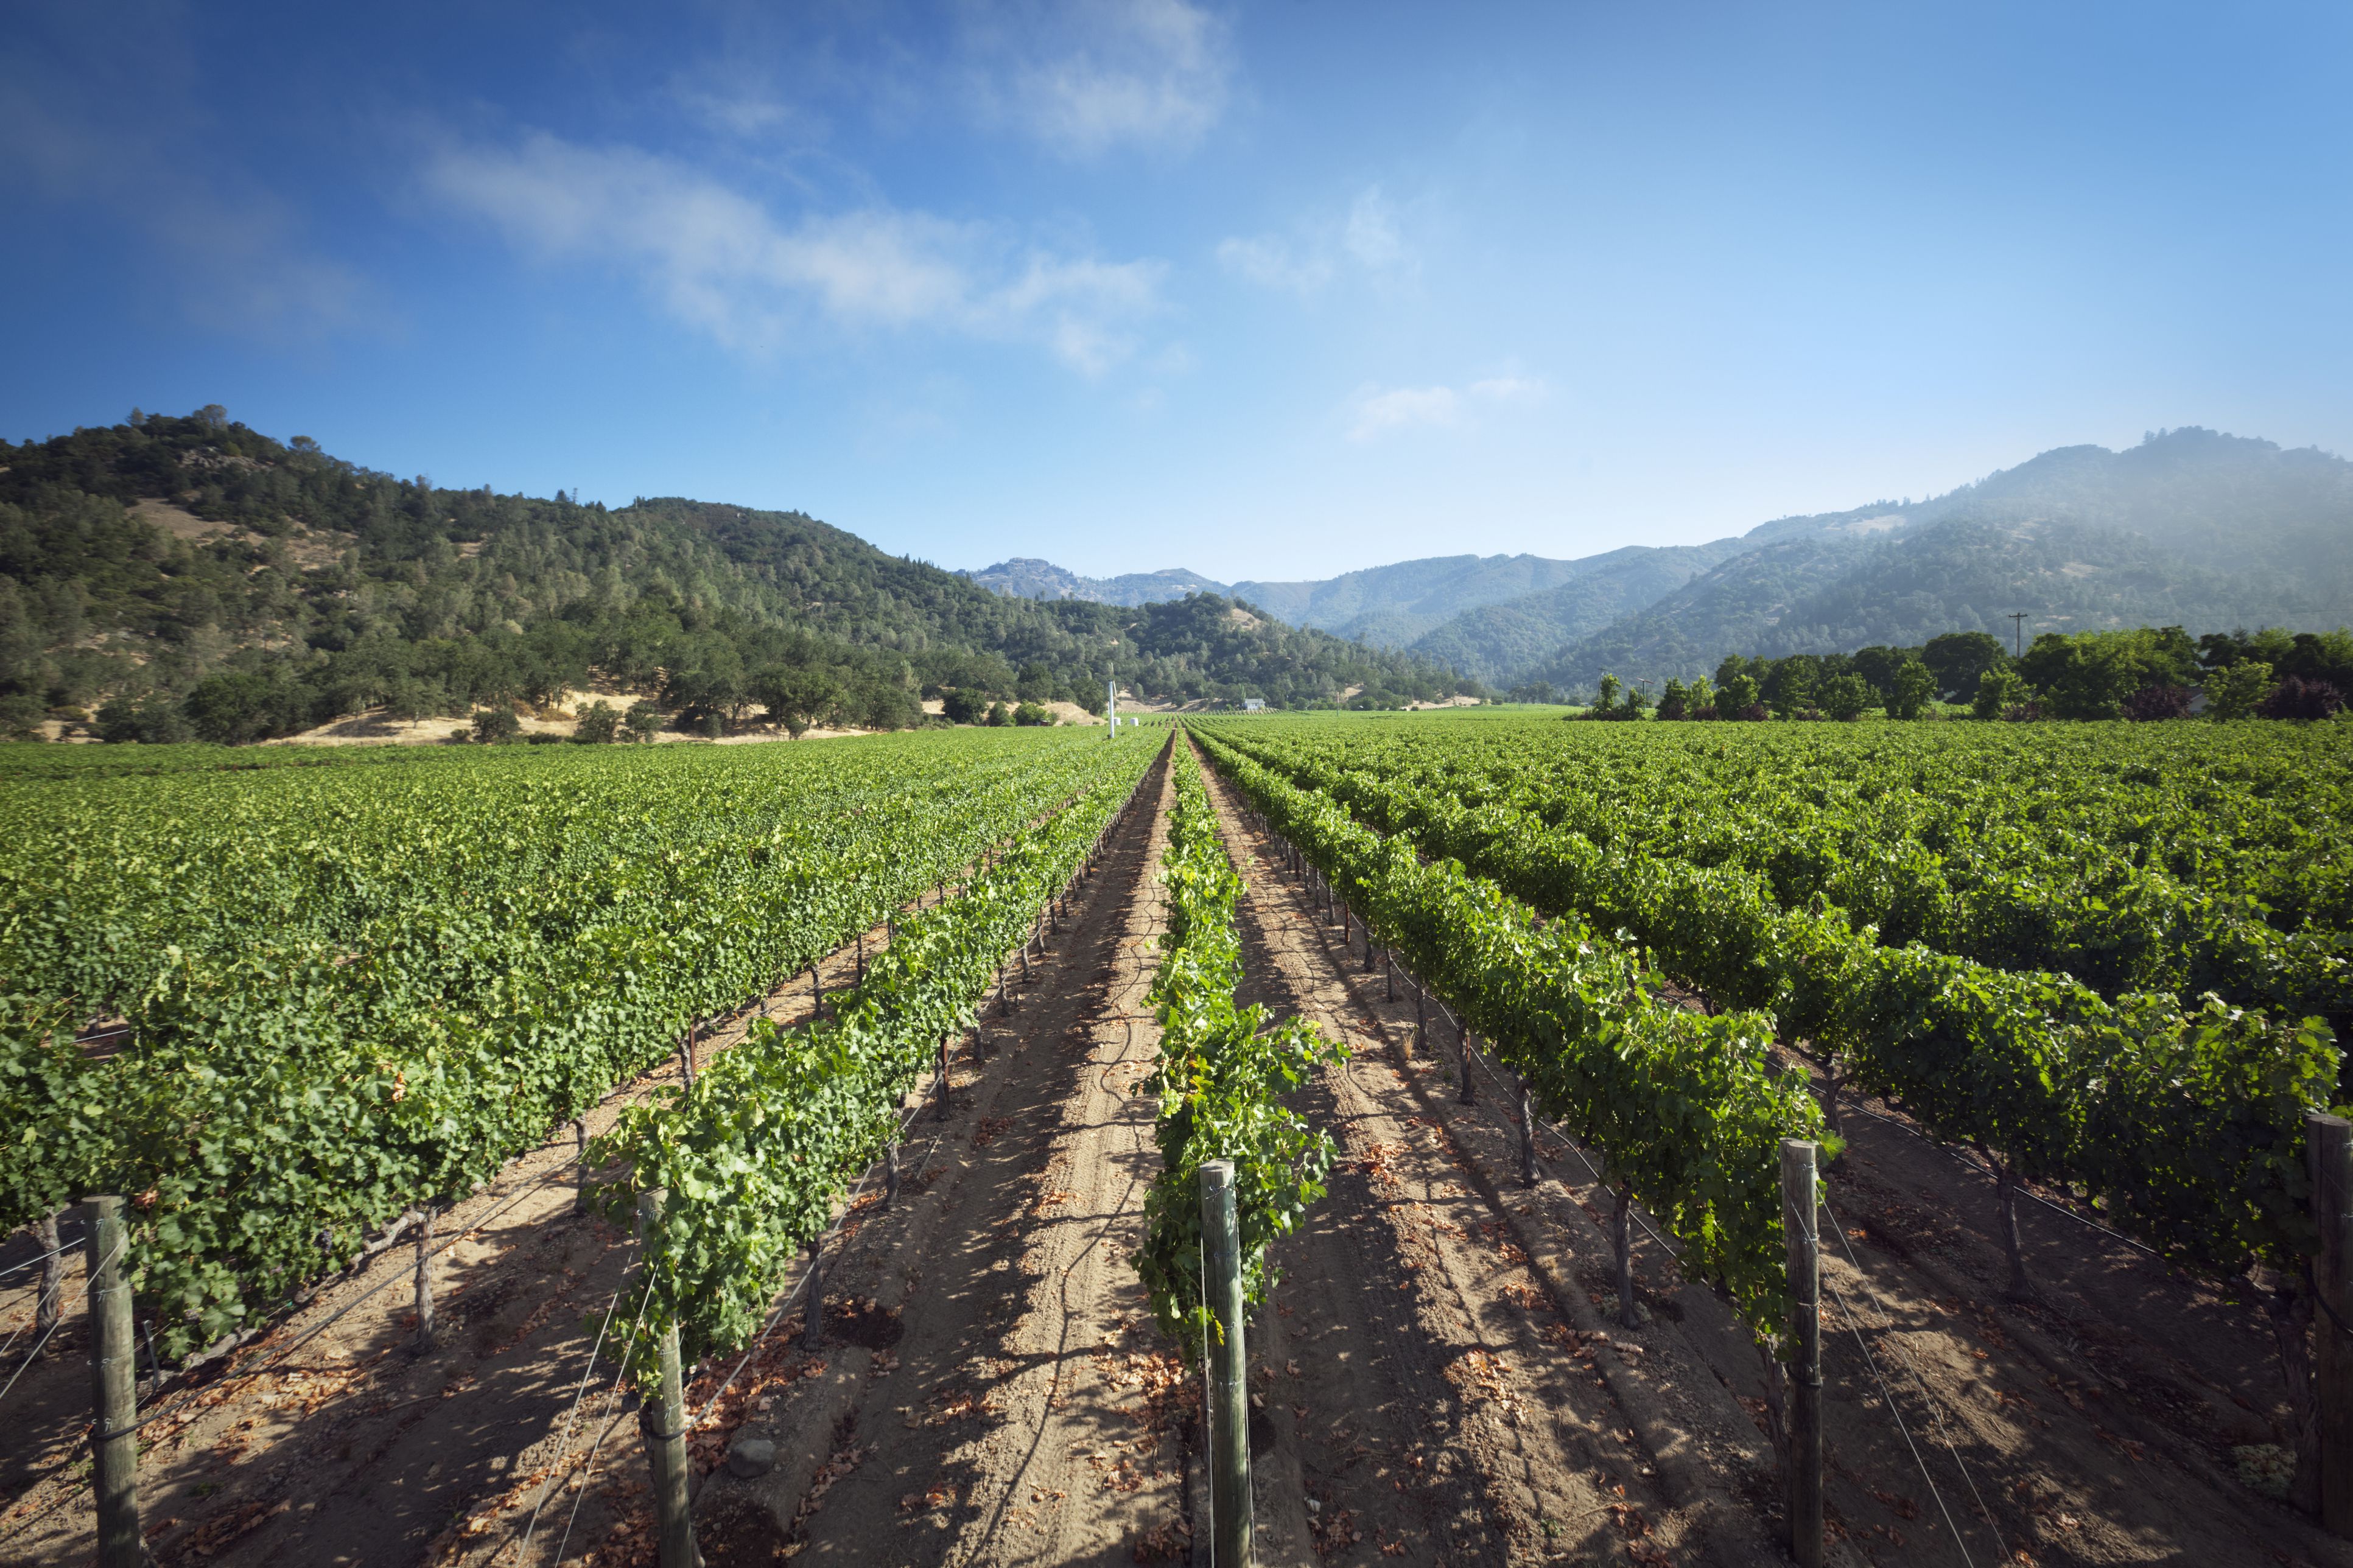 Napa Valley in Summer - What to Expect